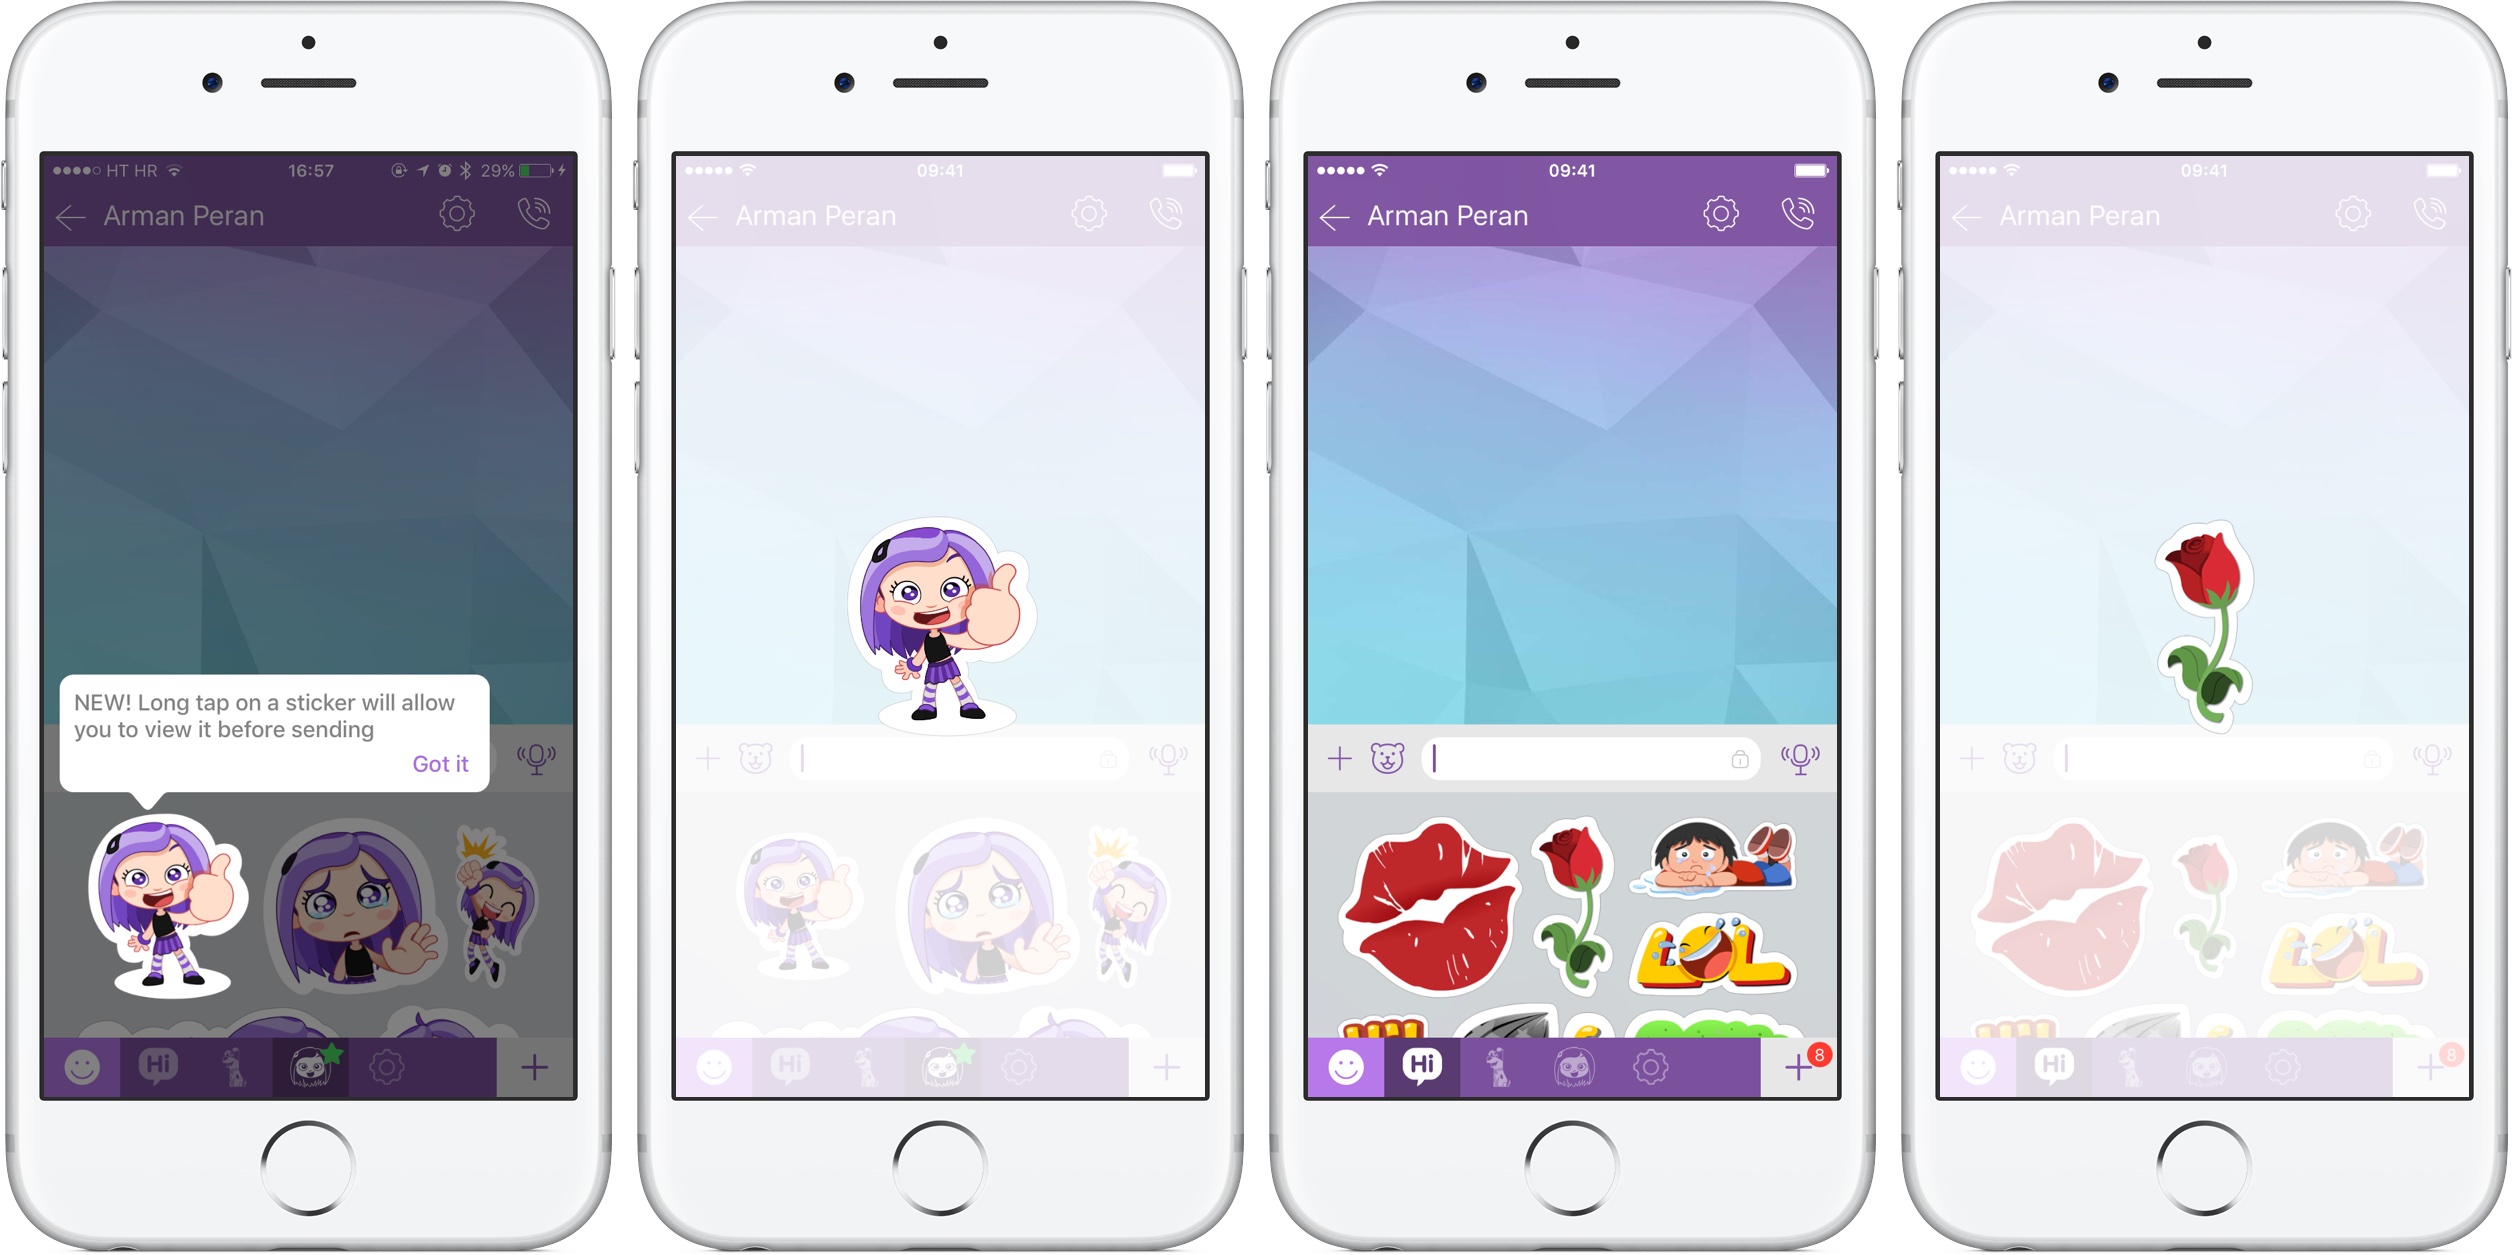 Viber 6.2 for iOS preview stickers silver iPhone screenshot 001